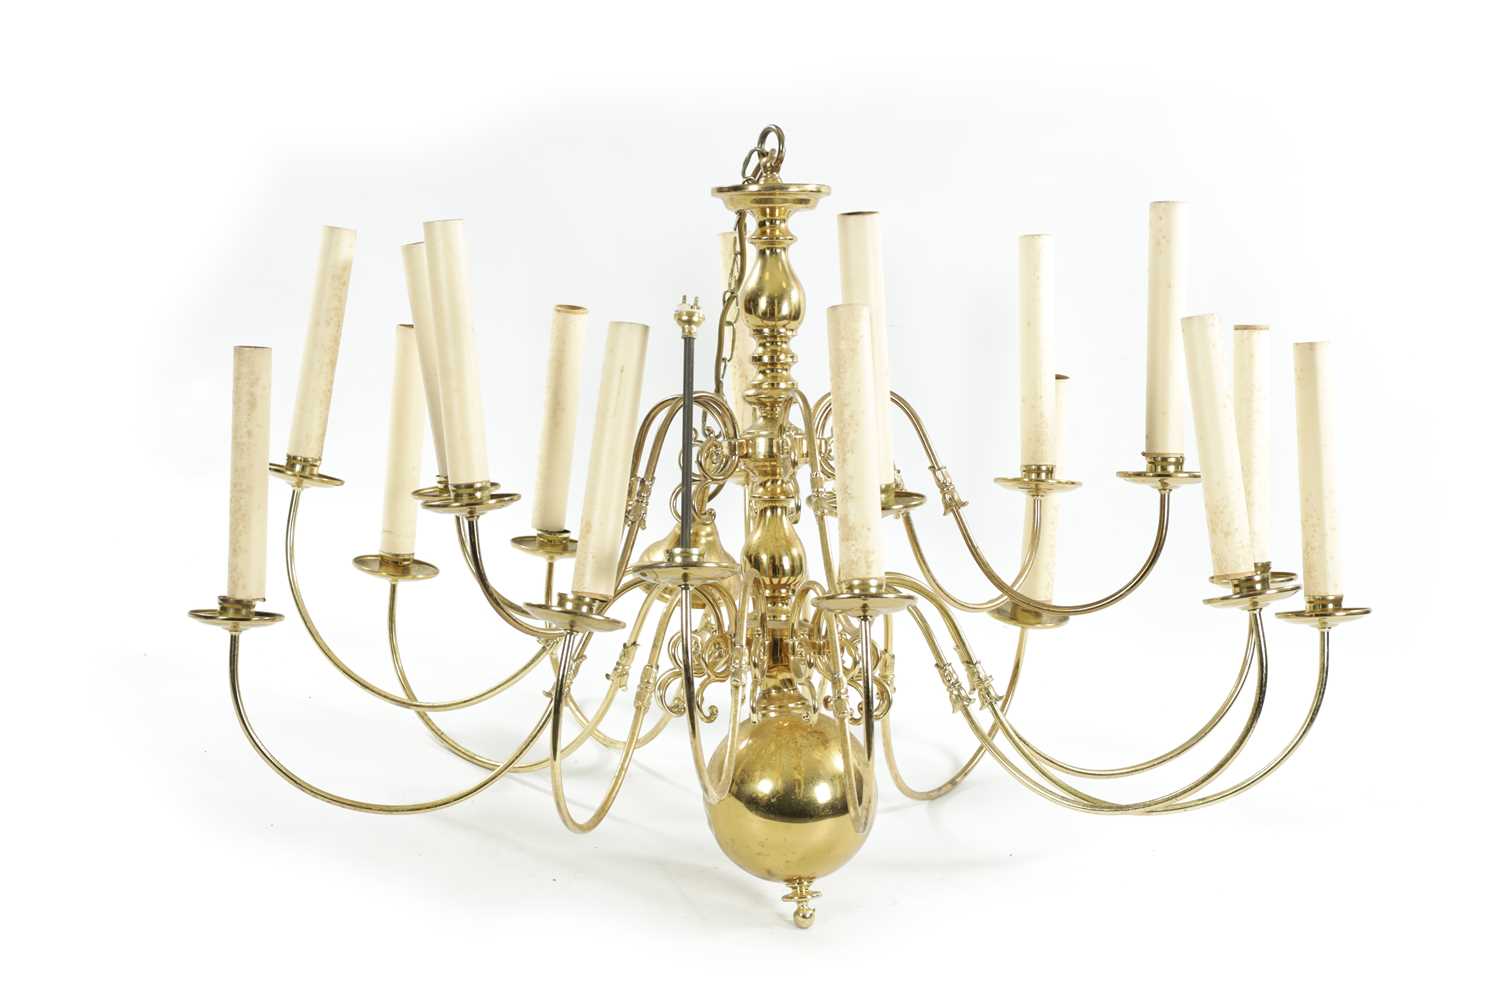 A LARGE 20TH CENTURY BRASS HANGING LIGHT